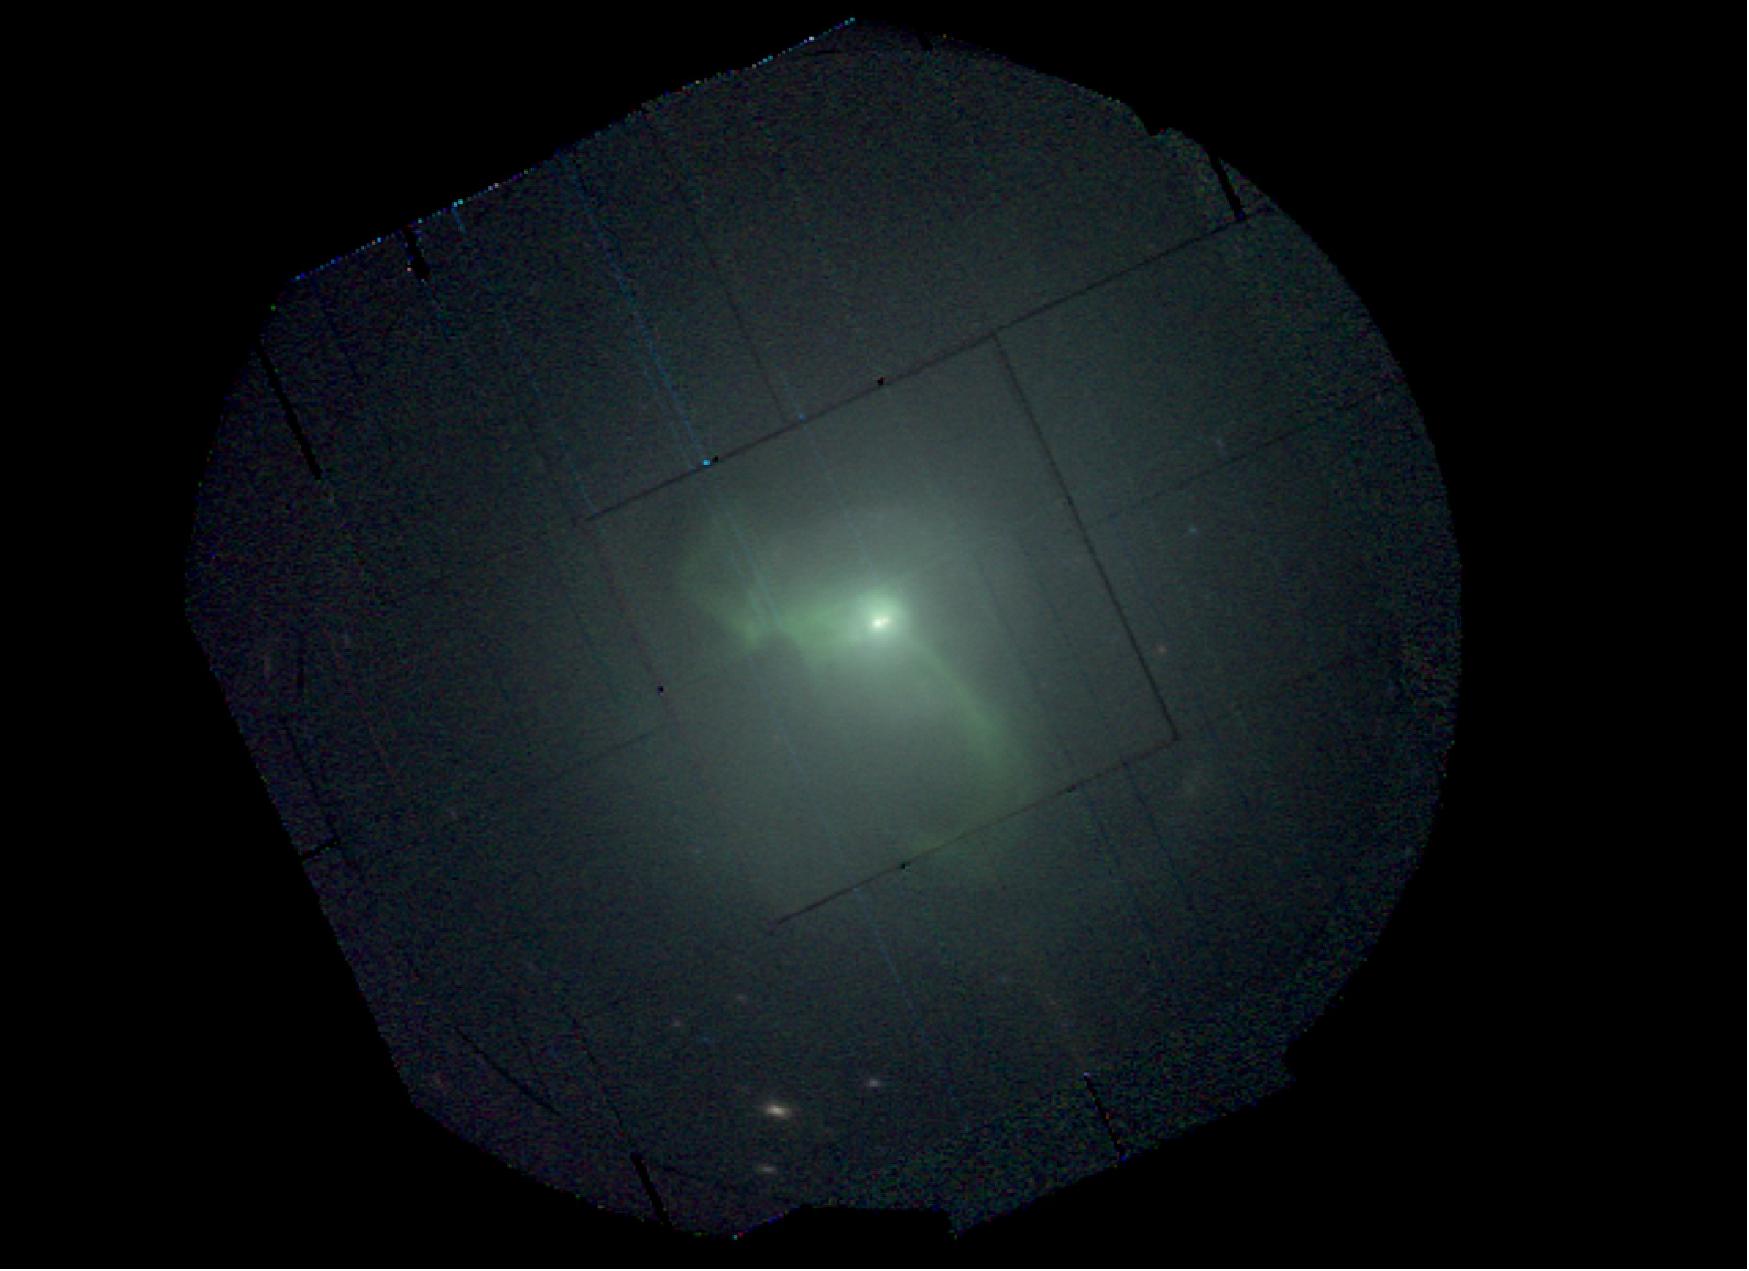 Figure 58: The core of the massive galaxy M87 (Messier 87) as viewed in X-rays by ESA’s XMM-Newton space observatory. The activity of the black hole also generates shock waves, such as the circular feature that can be seen around the center of the image. This view is based on data collected at X-ray energies between 0.3 and 7 keV with the EPIC camera onboard XMM-Newton on 16 July 2017. The image spans 40 arcminutes on each side (image credit: ESA/XMM-Newton; Acknowledgement: P. Rodriguez)